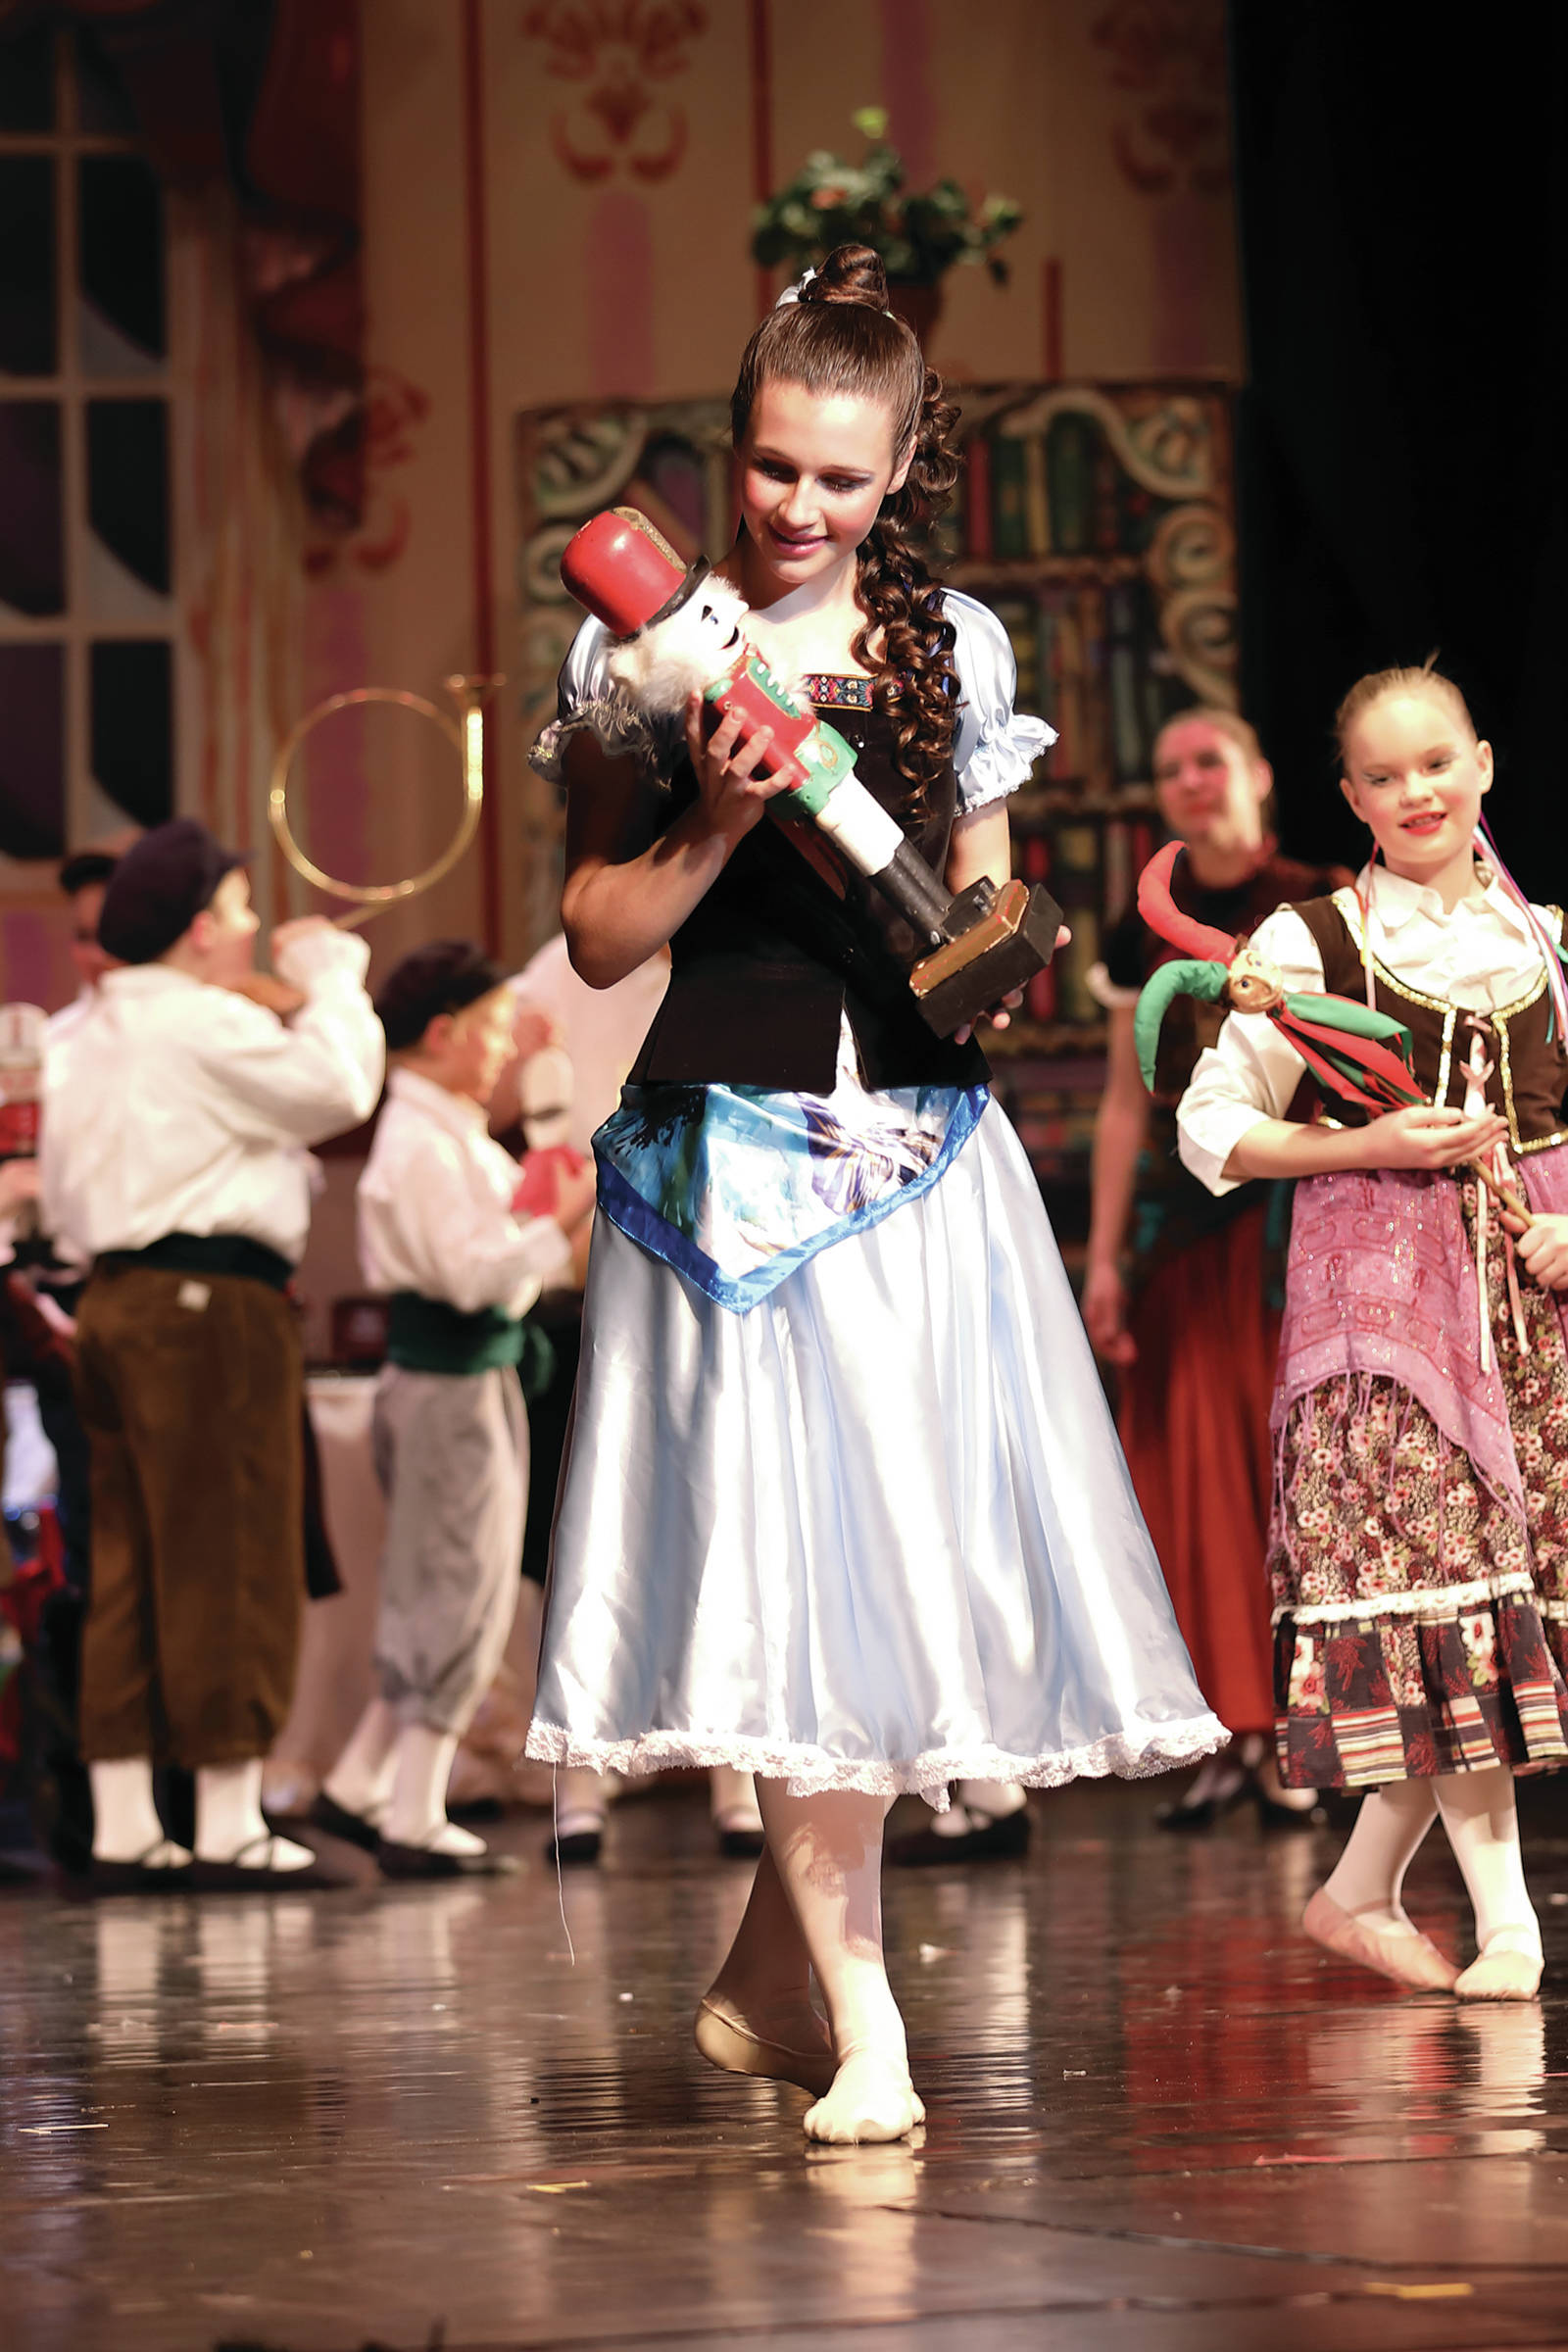 Ireland Styvar performs as Clara on Dec. 6, 2019, in the 2019 production of the Homer Nutcracker Ballet at the Mariner Theatre, in Homer, Alaska. The ballet continues this weekend at 7:30 p.m. Friday, Dec. 13, and 3 p.m. Saturday, Dec. 14. (Photo by Aaron Christ)